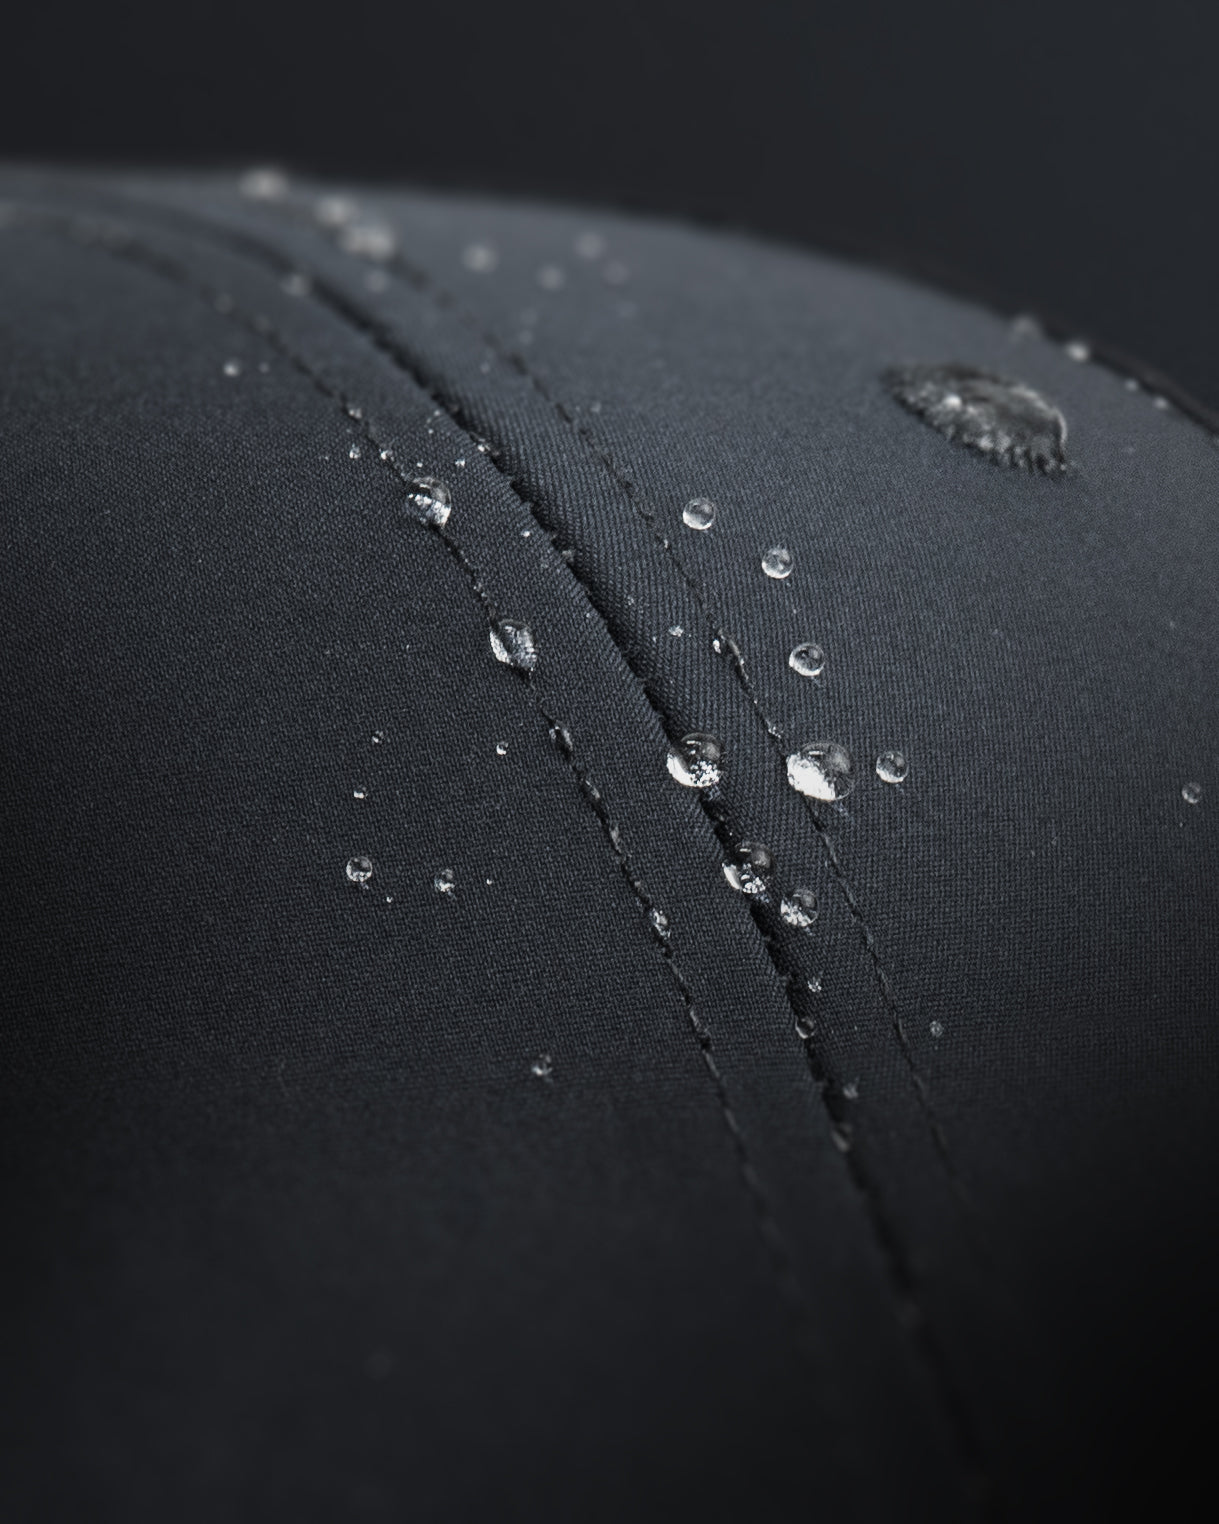 Performance Hats with Waterproof Hydrophobic Finish | ACTV 016